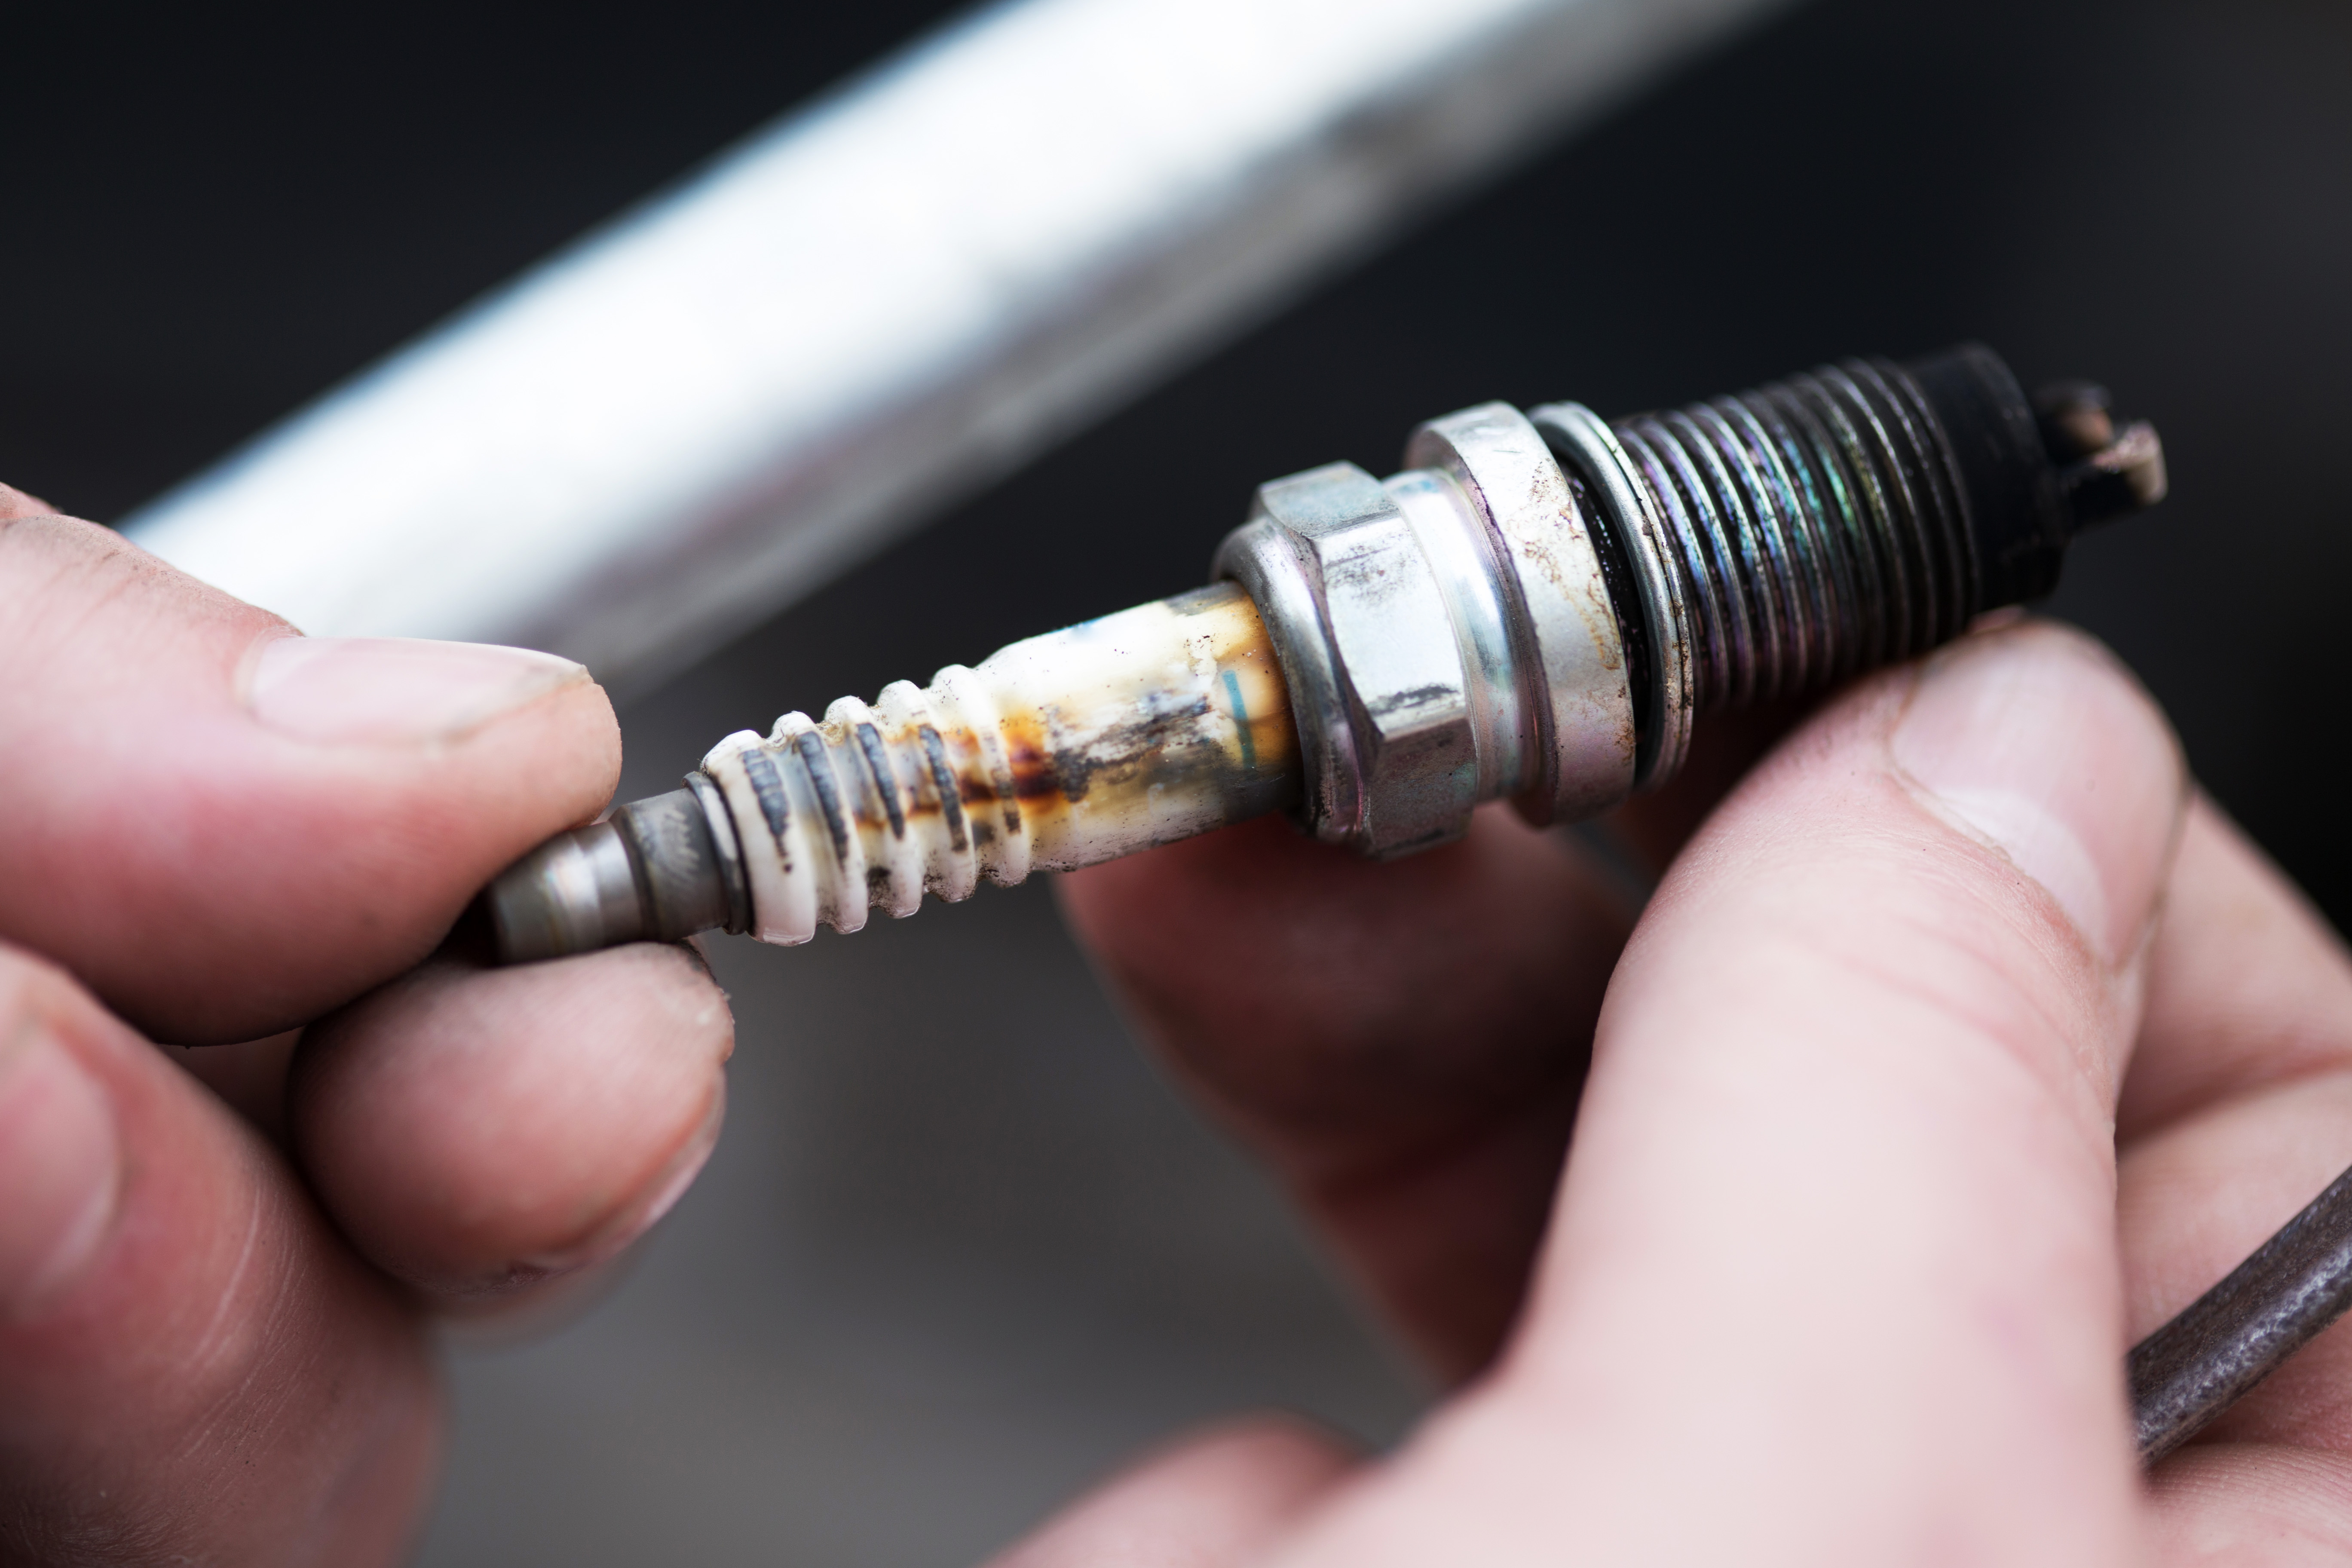 Inventors of the Spark Plug